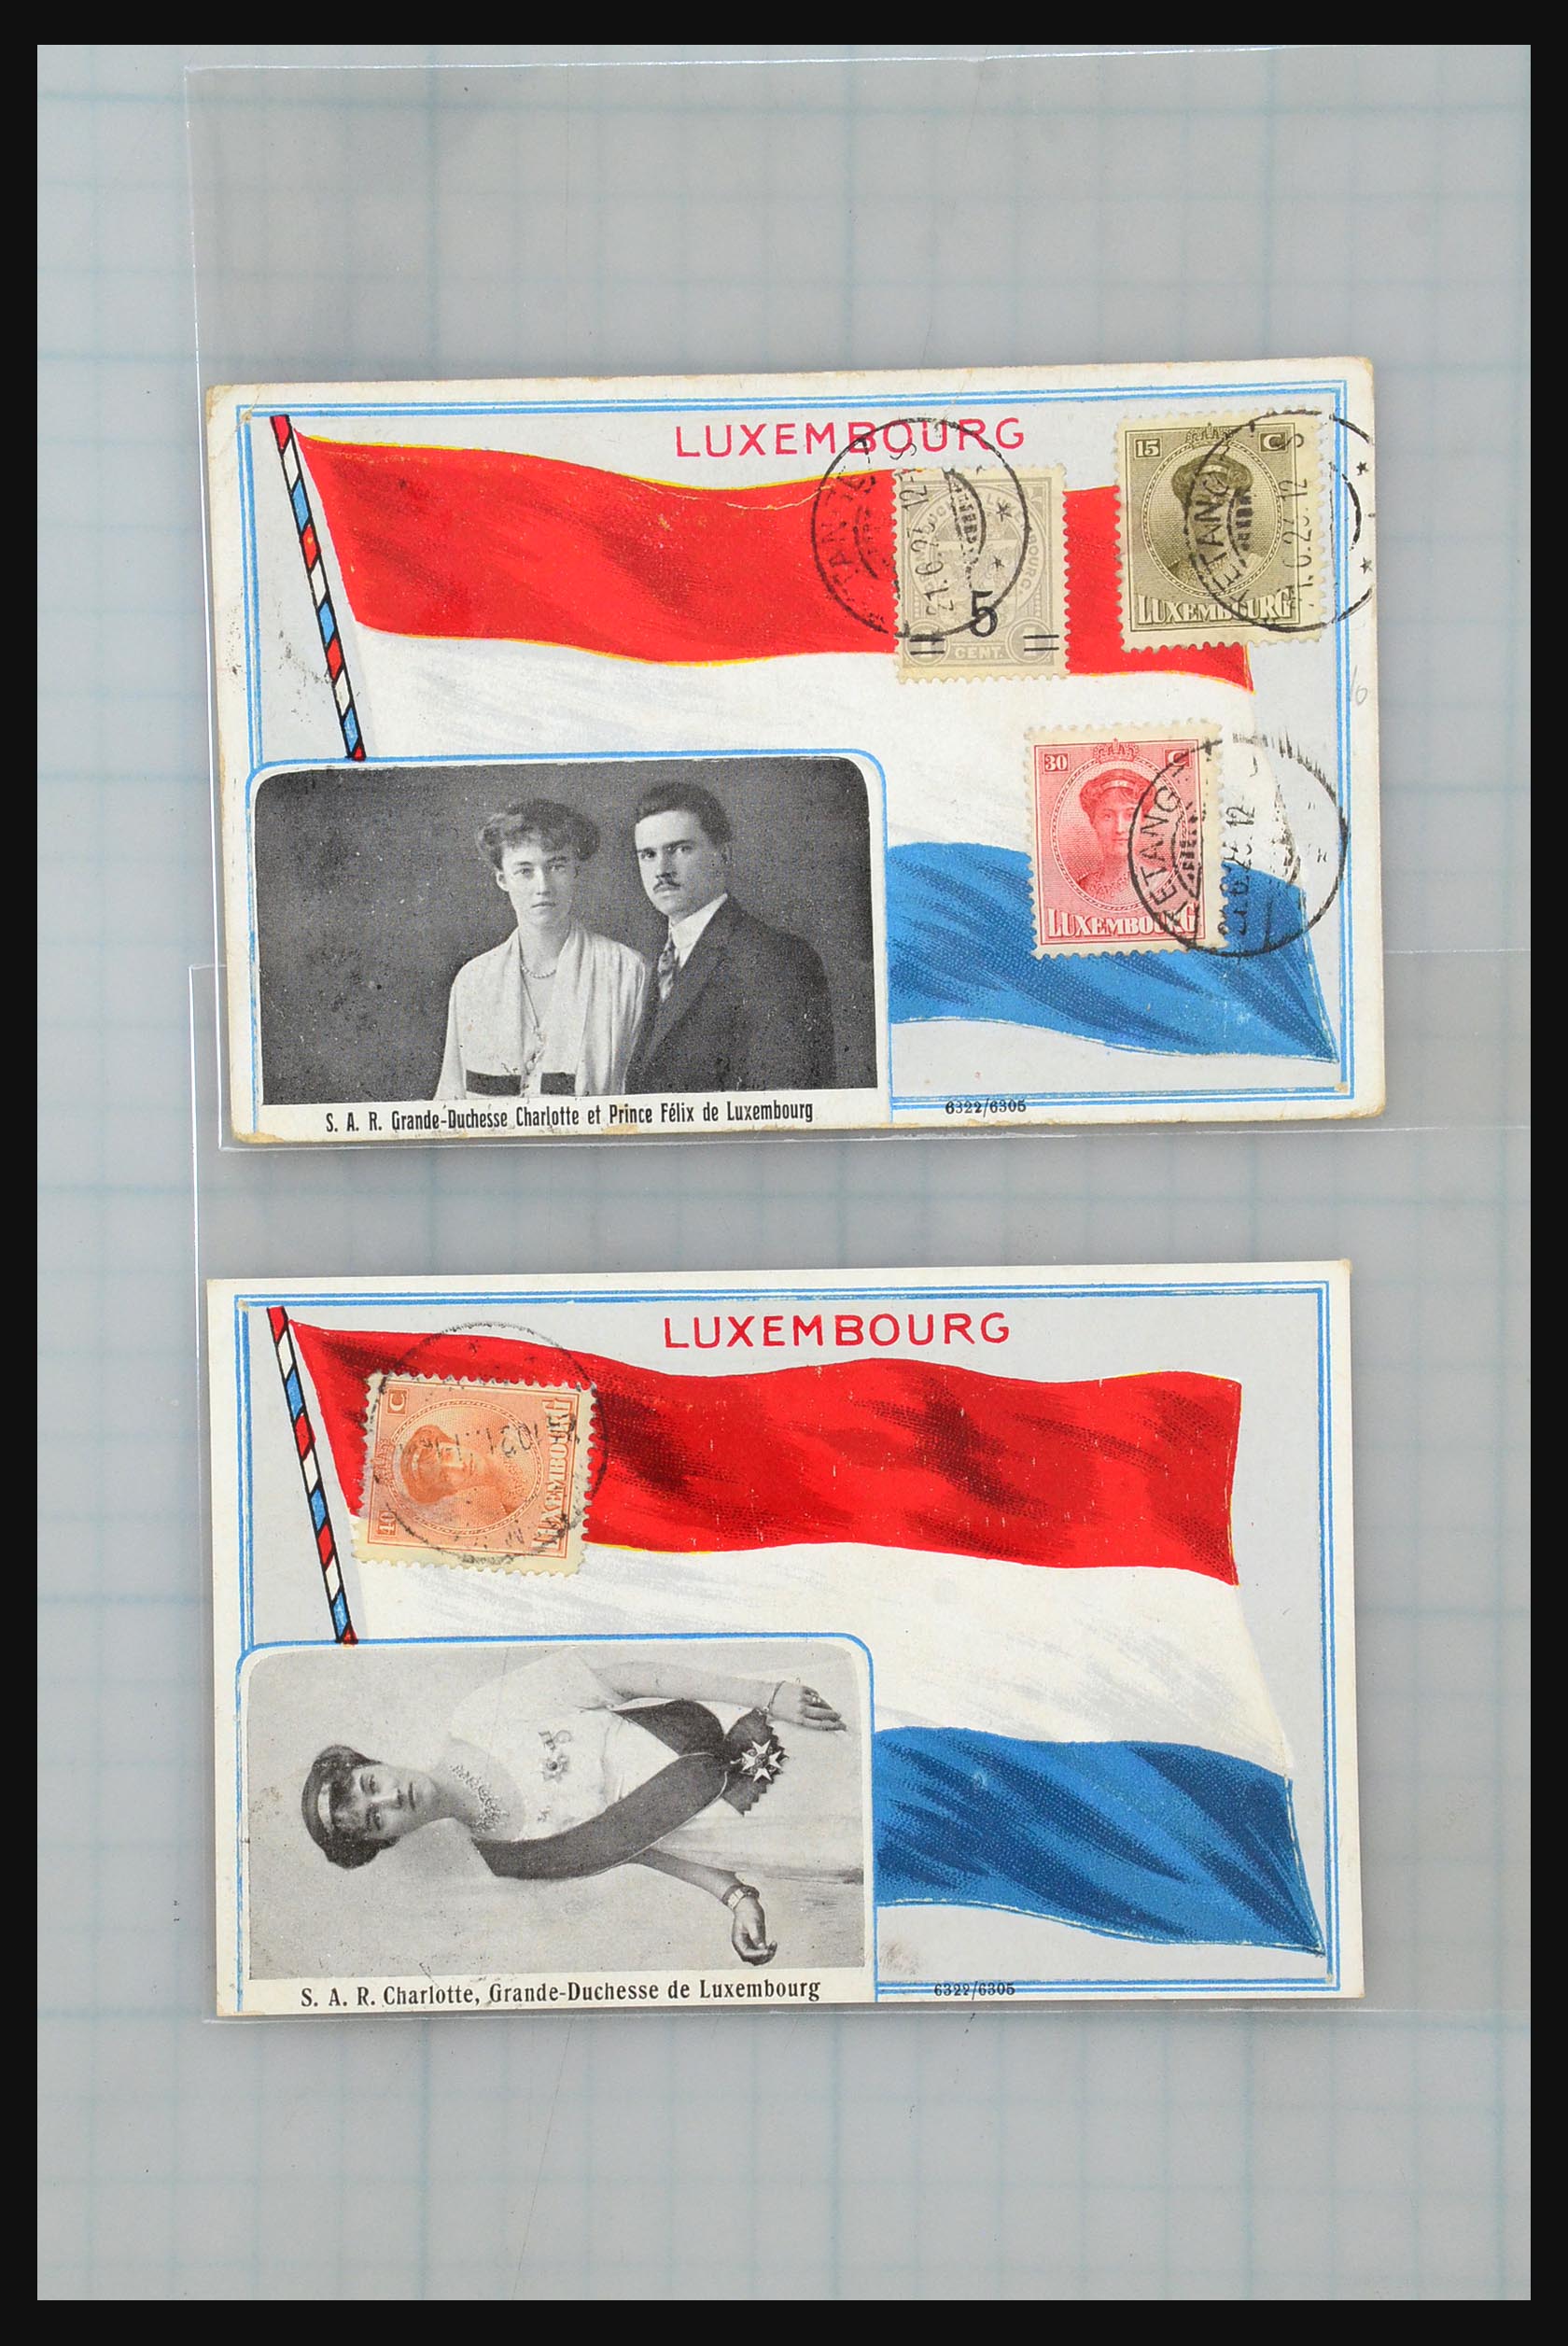 31358 022 - 31358 Portugal/Luxemburg/Greece covers 1880-1960.